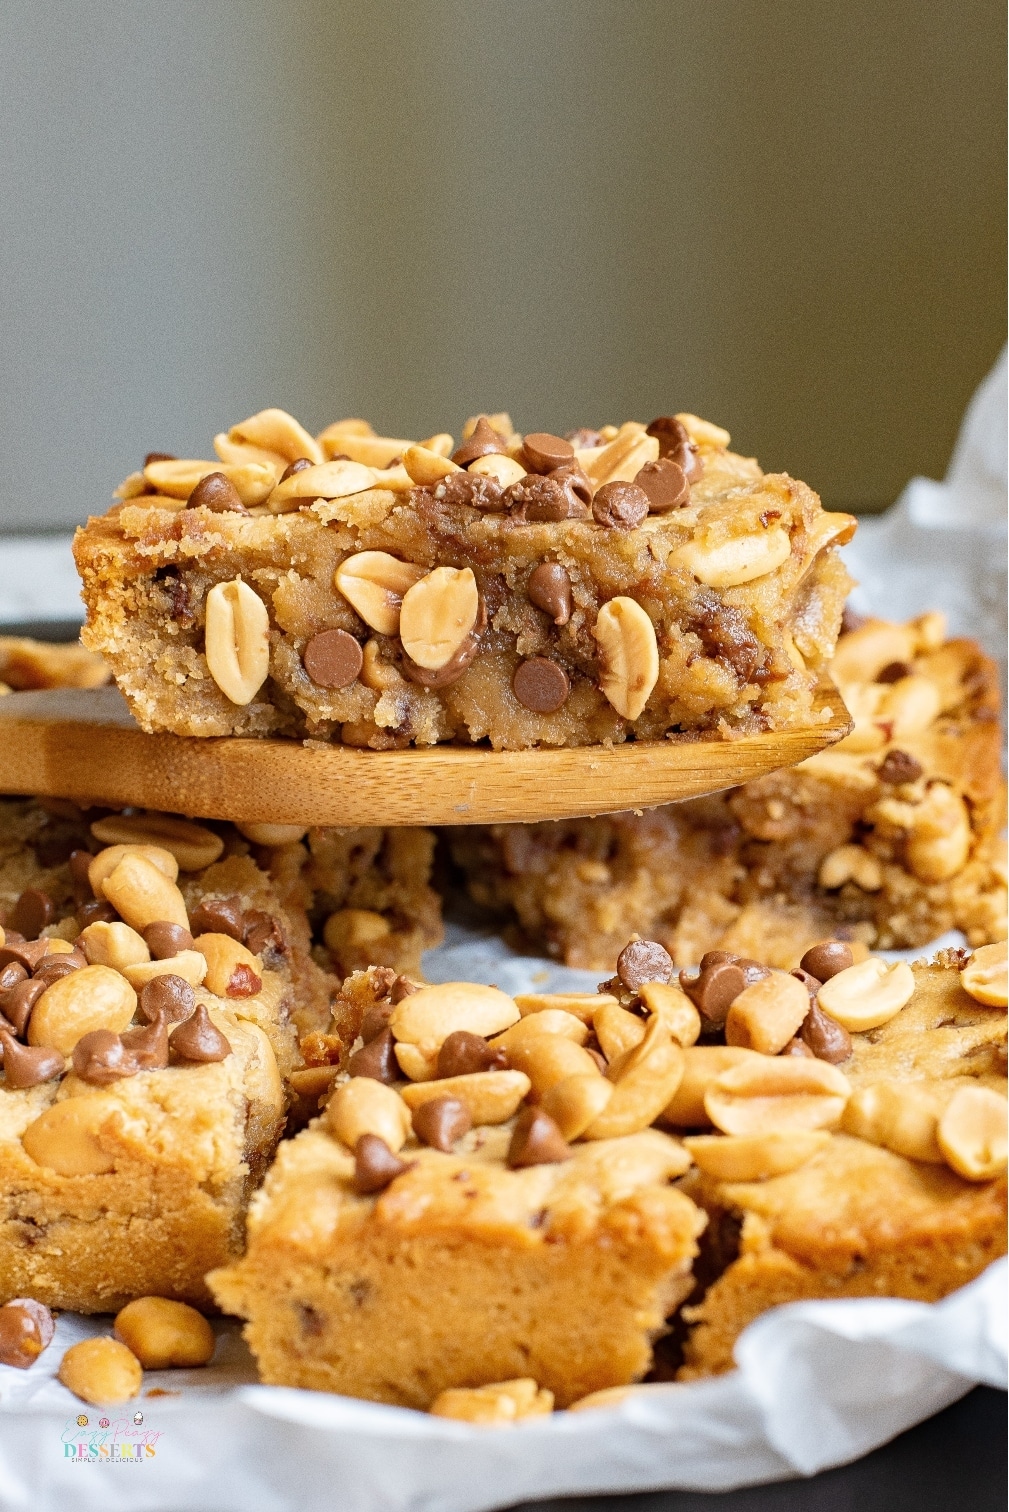 Peanut butter chocolate chip bars